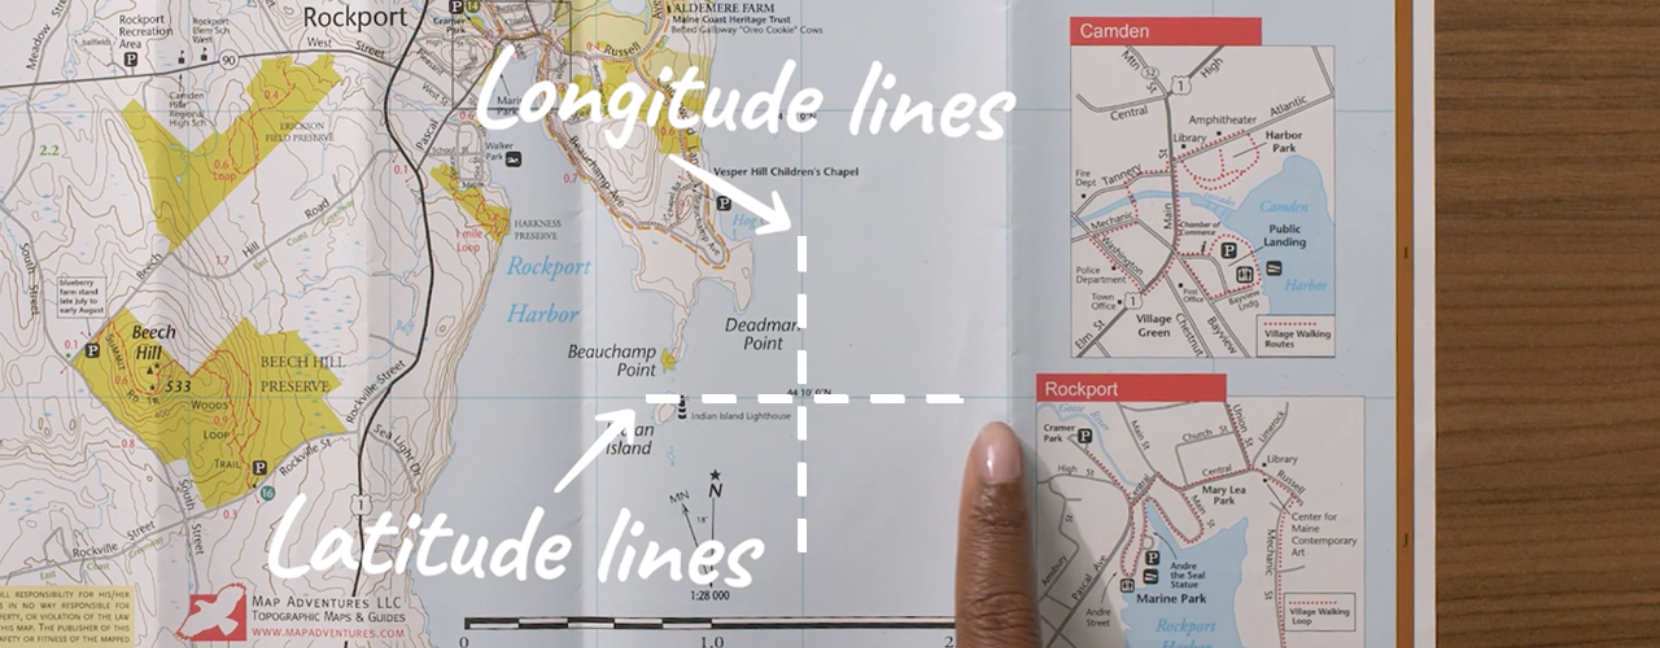 A map with the latitude and longitude lines called out with dotted white lines and arrows.